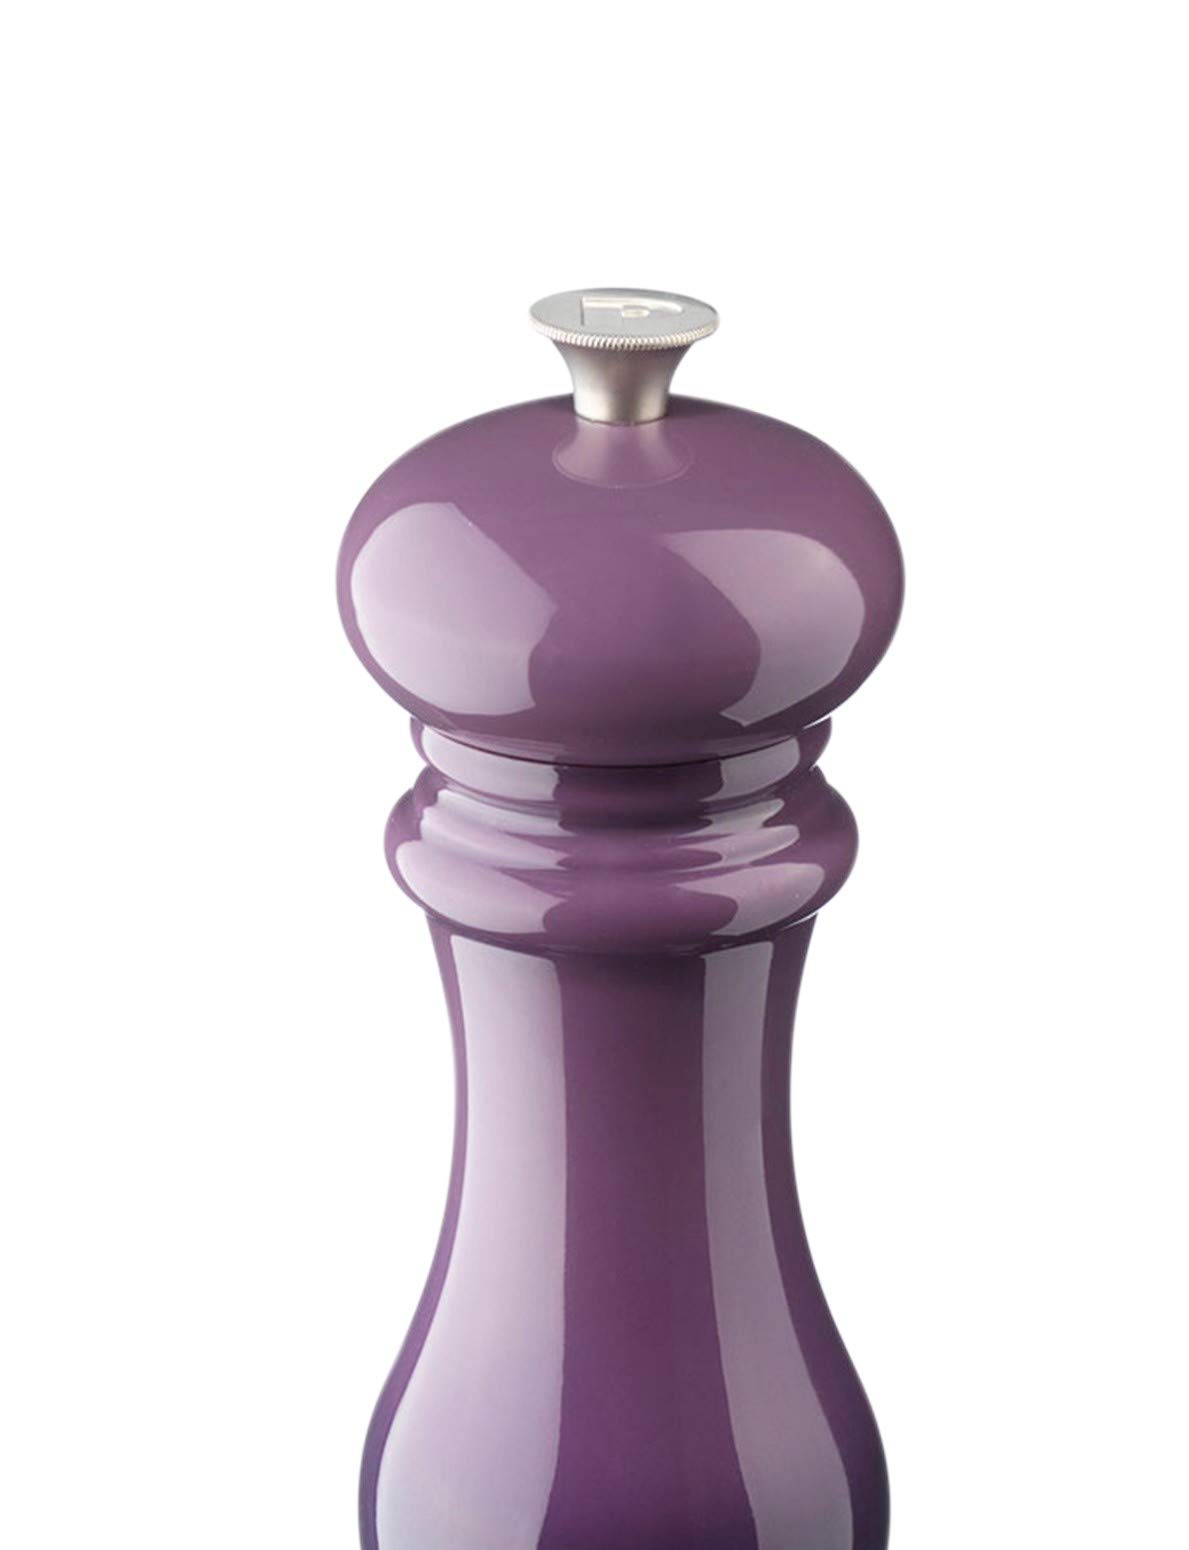 Le Creuset MG600-72 Pepper Mill, 8-Inch, Cassis